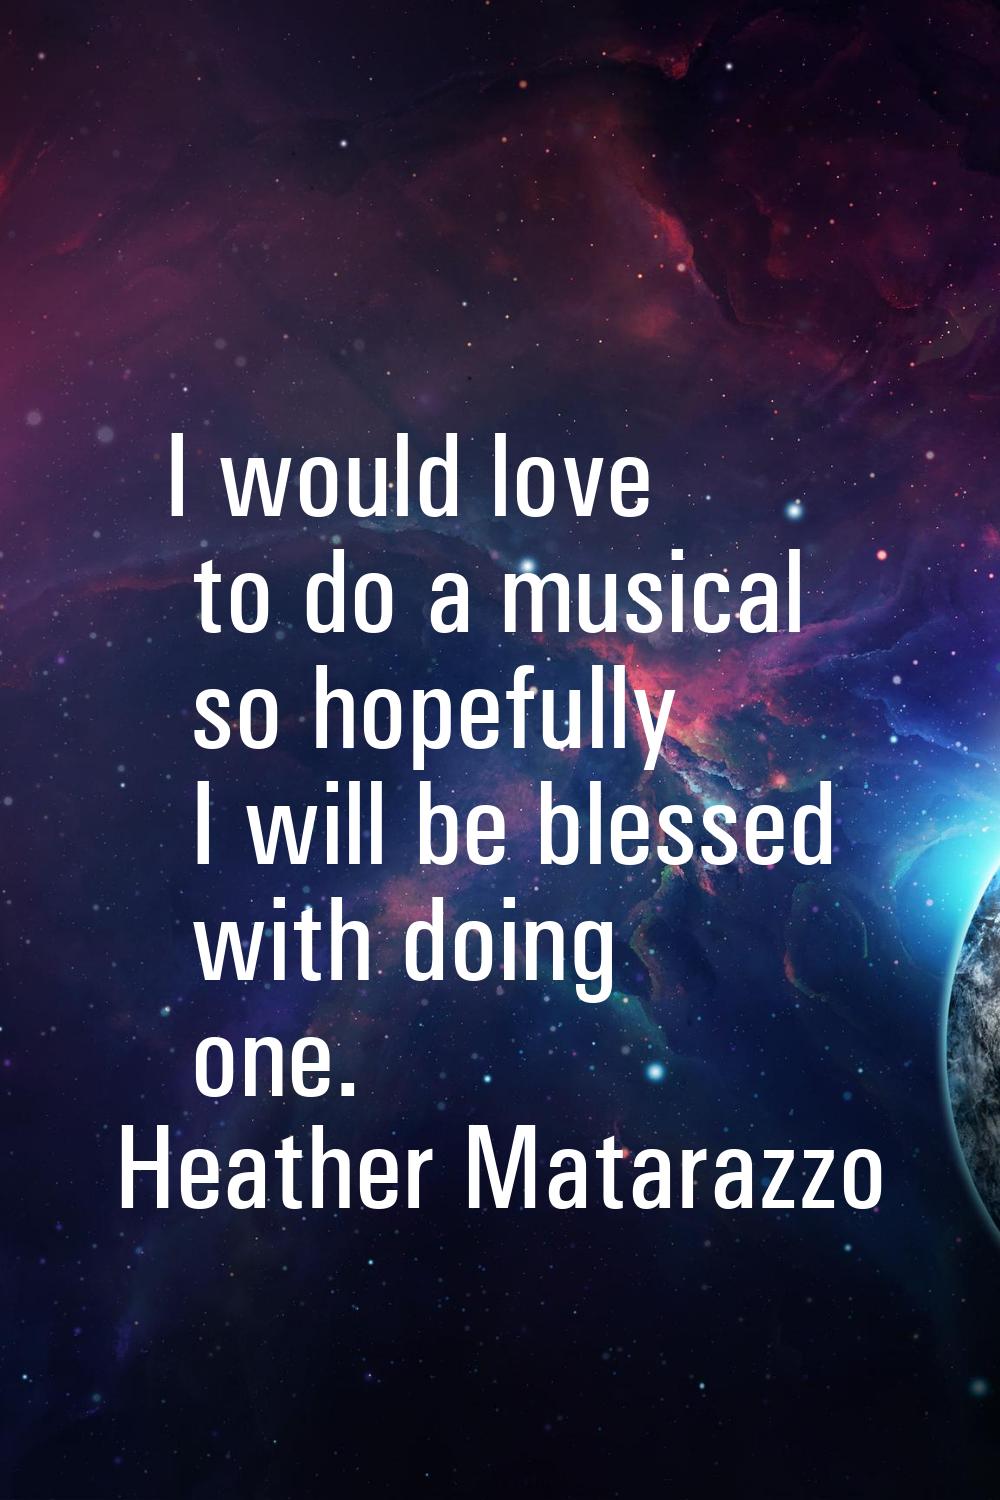 I would love to do a musical so hopefully I will be blessed with doing one.